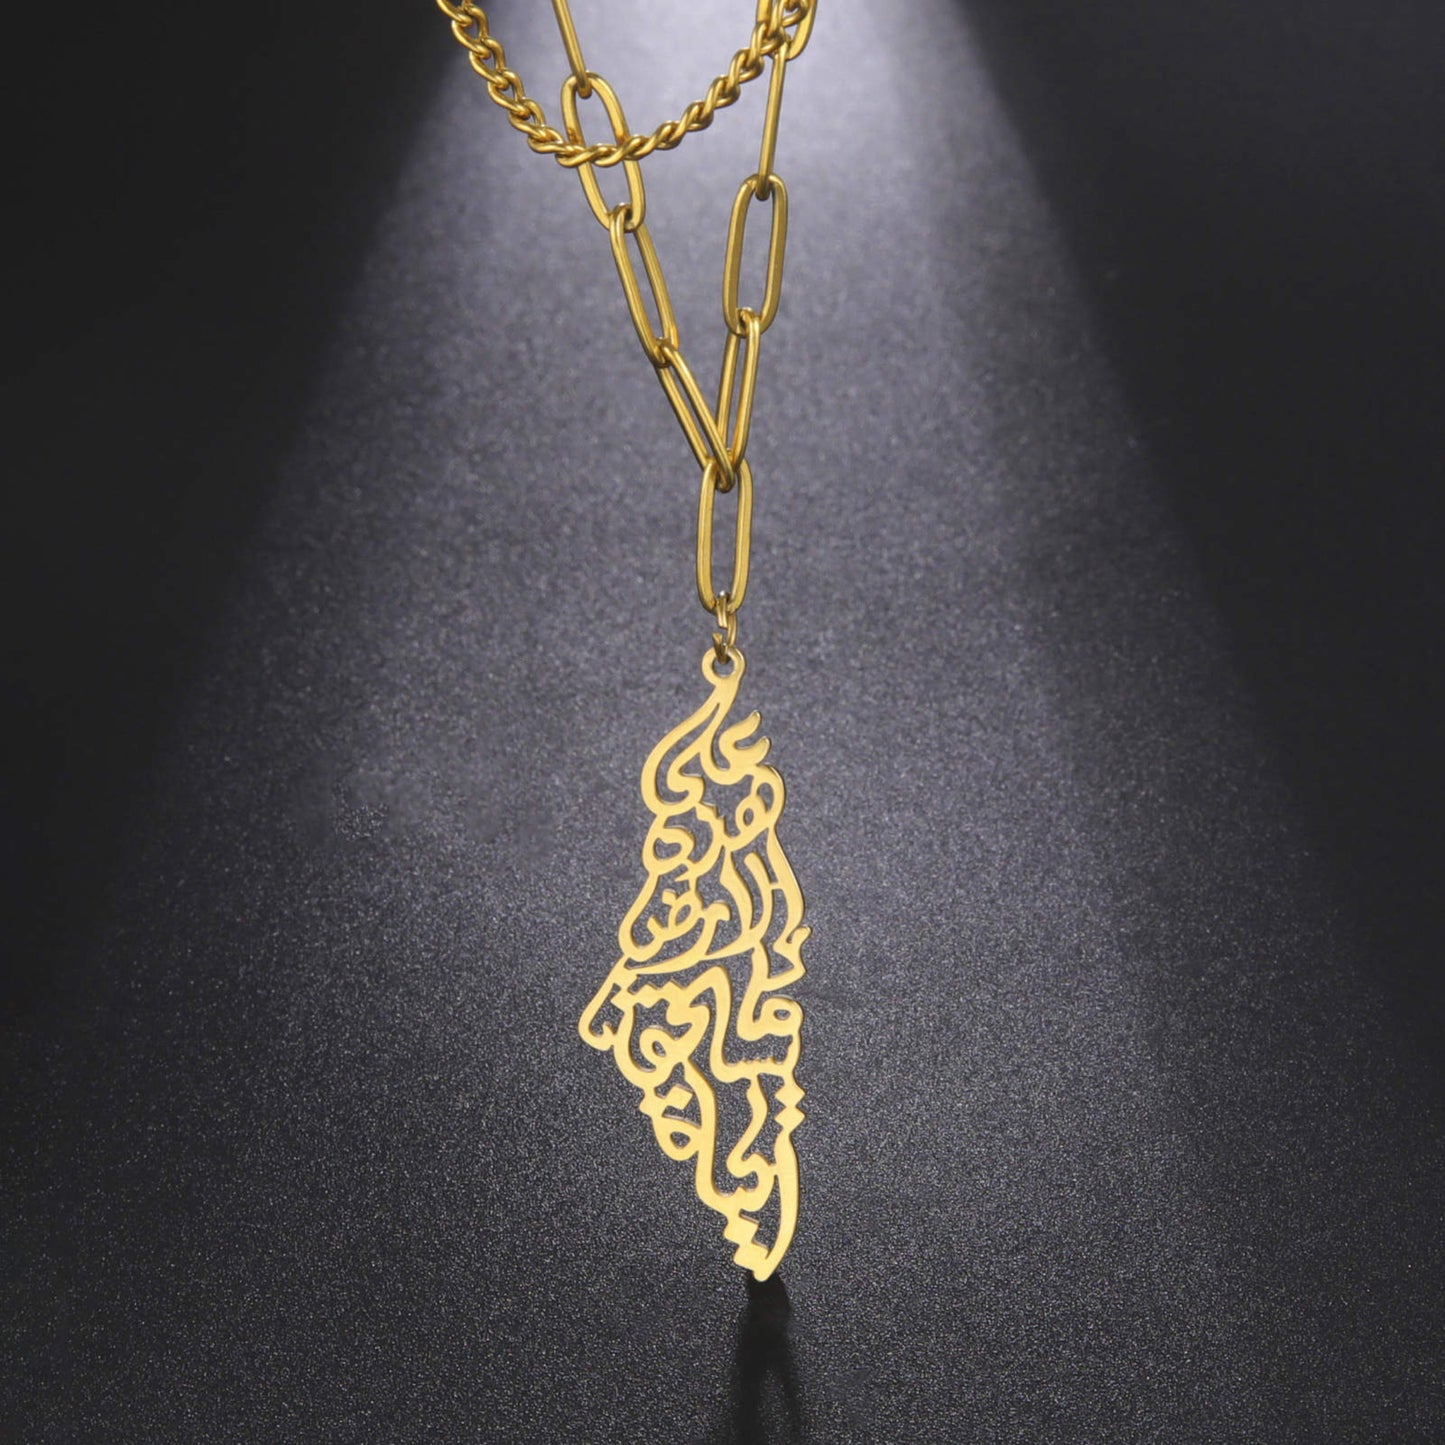 Palestine layered calligraphy necklace